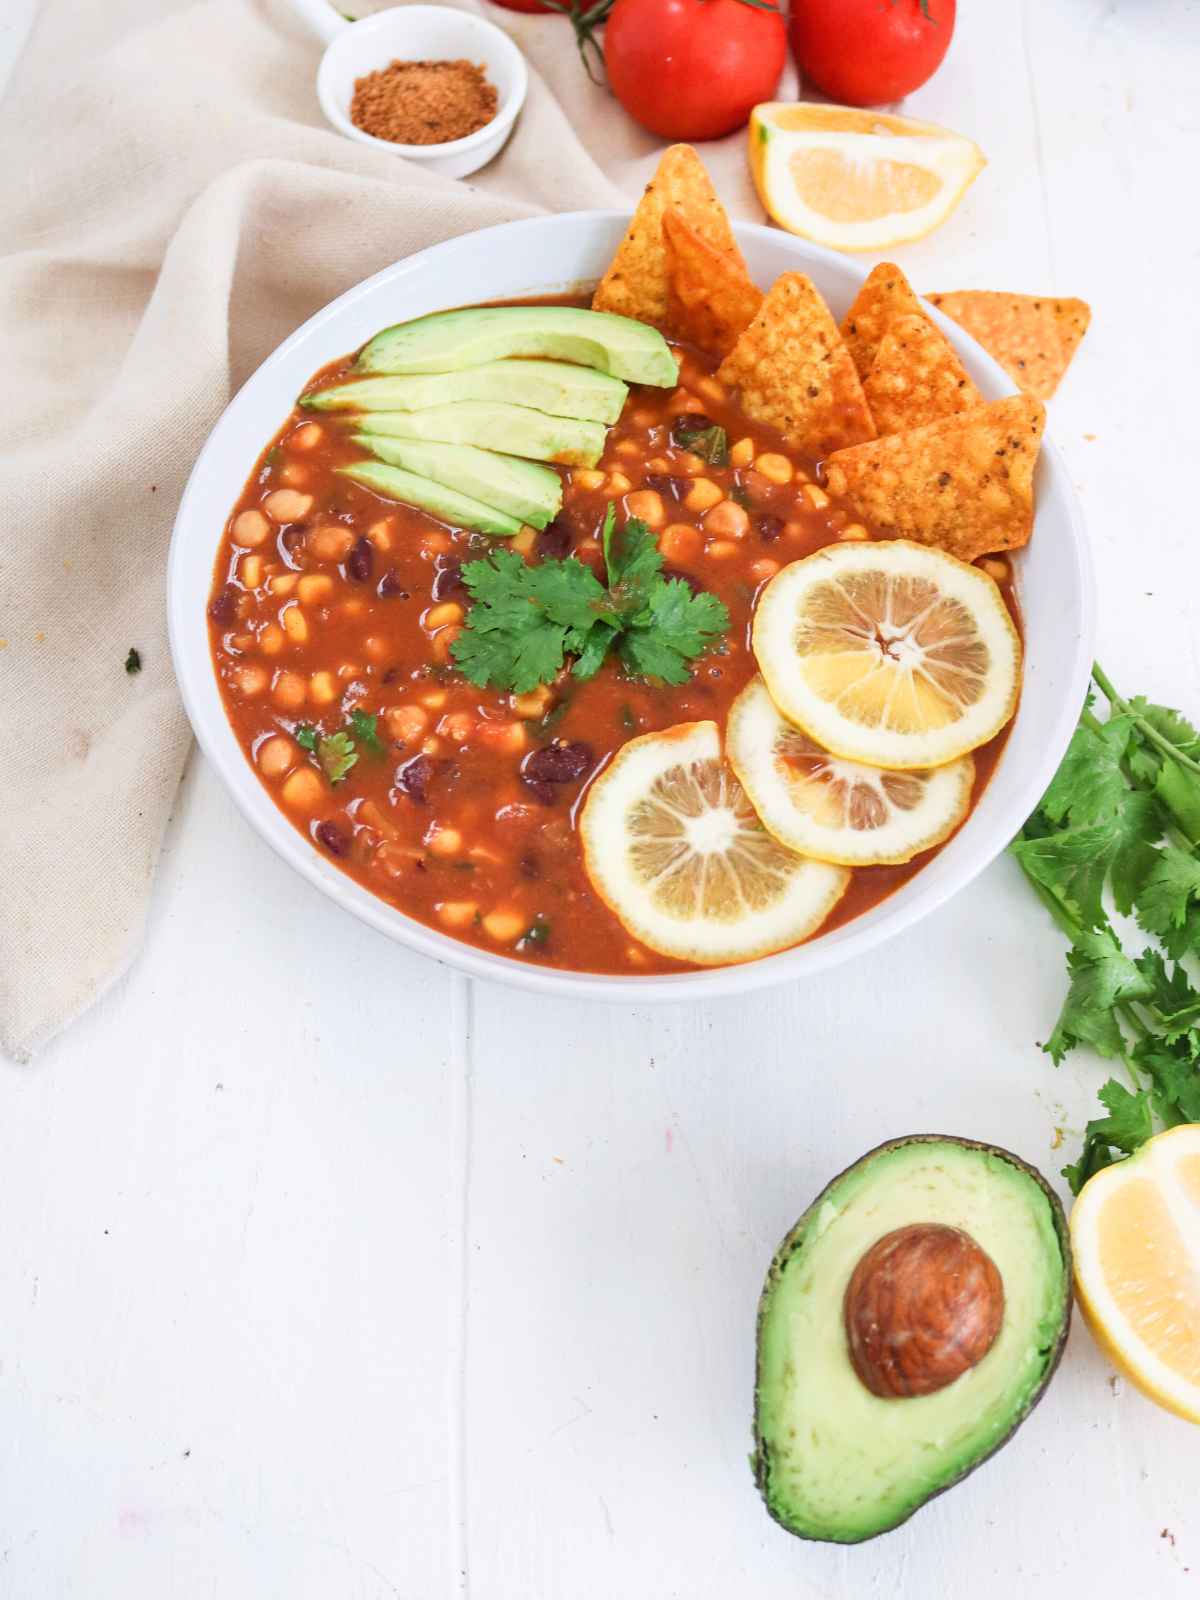 Taco Soup served in a white bowl garnished with avocado slices, cilantro leaves and lemon wedges.